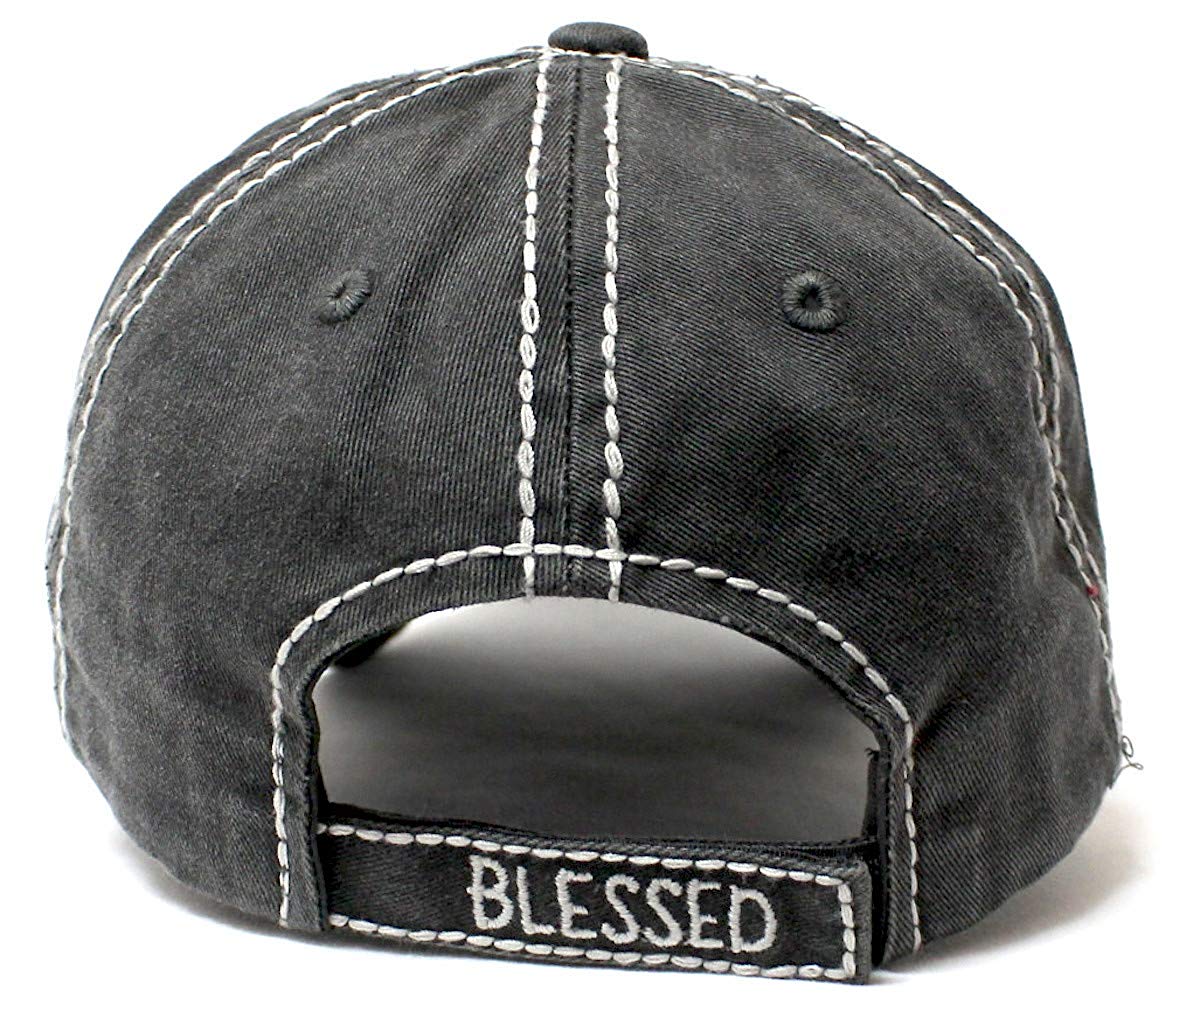 CAPS 'N VINTAGE Charcoal Blk Thankful & Blessed Chrome Patch Embroidery Hat - Caps 'N Vintage 